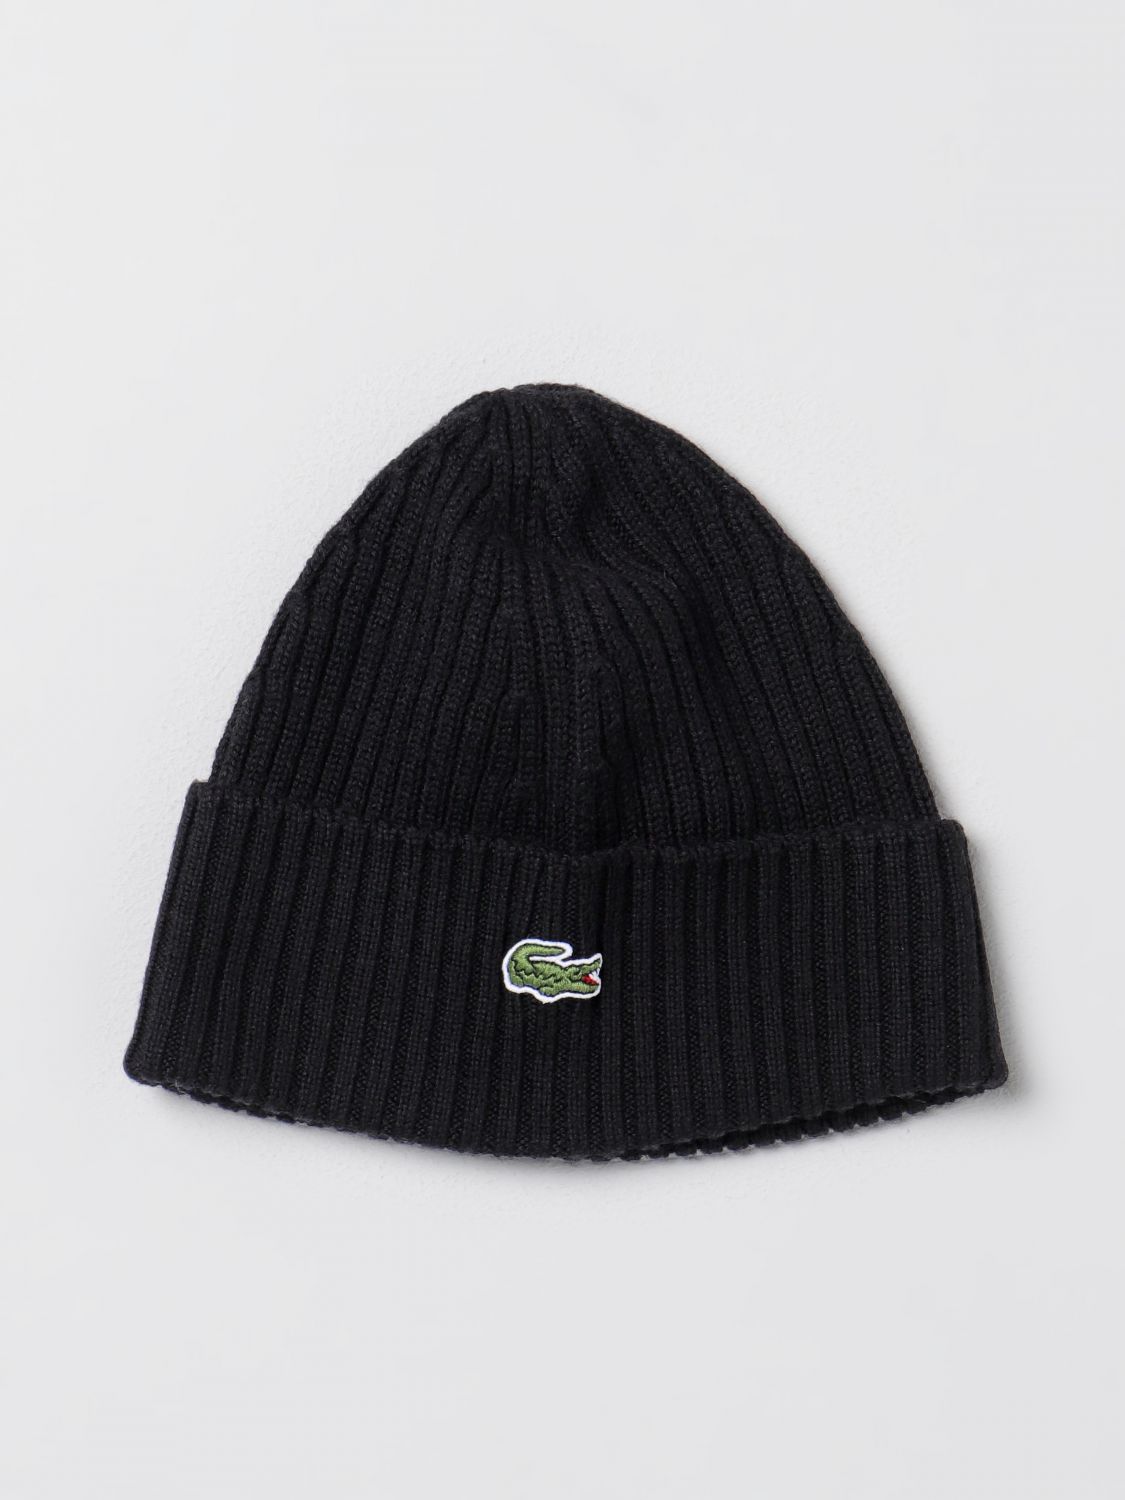 LACOSTE: hat for man - Black | Lacoste hat RB0001 online at GIGLIO.COM